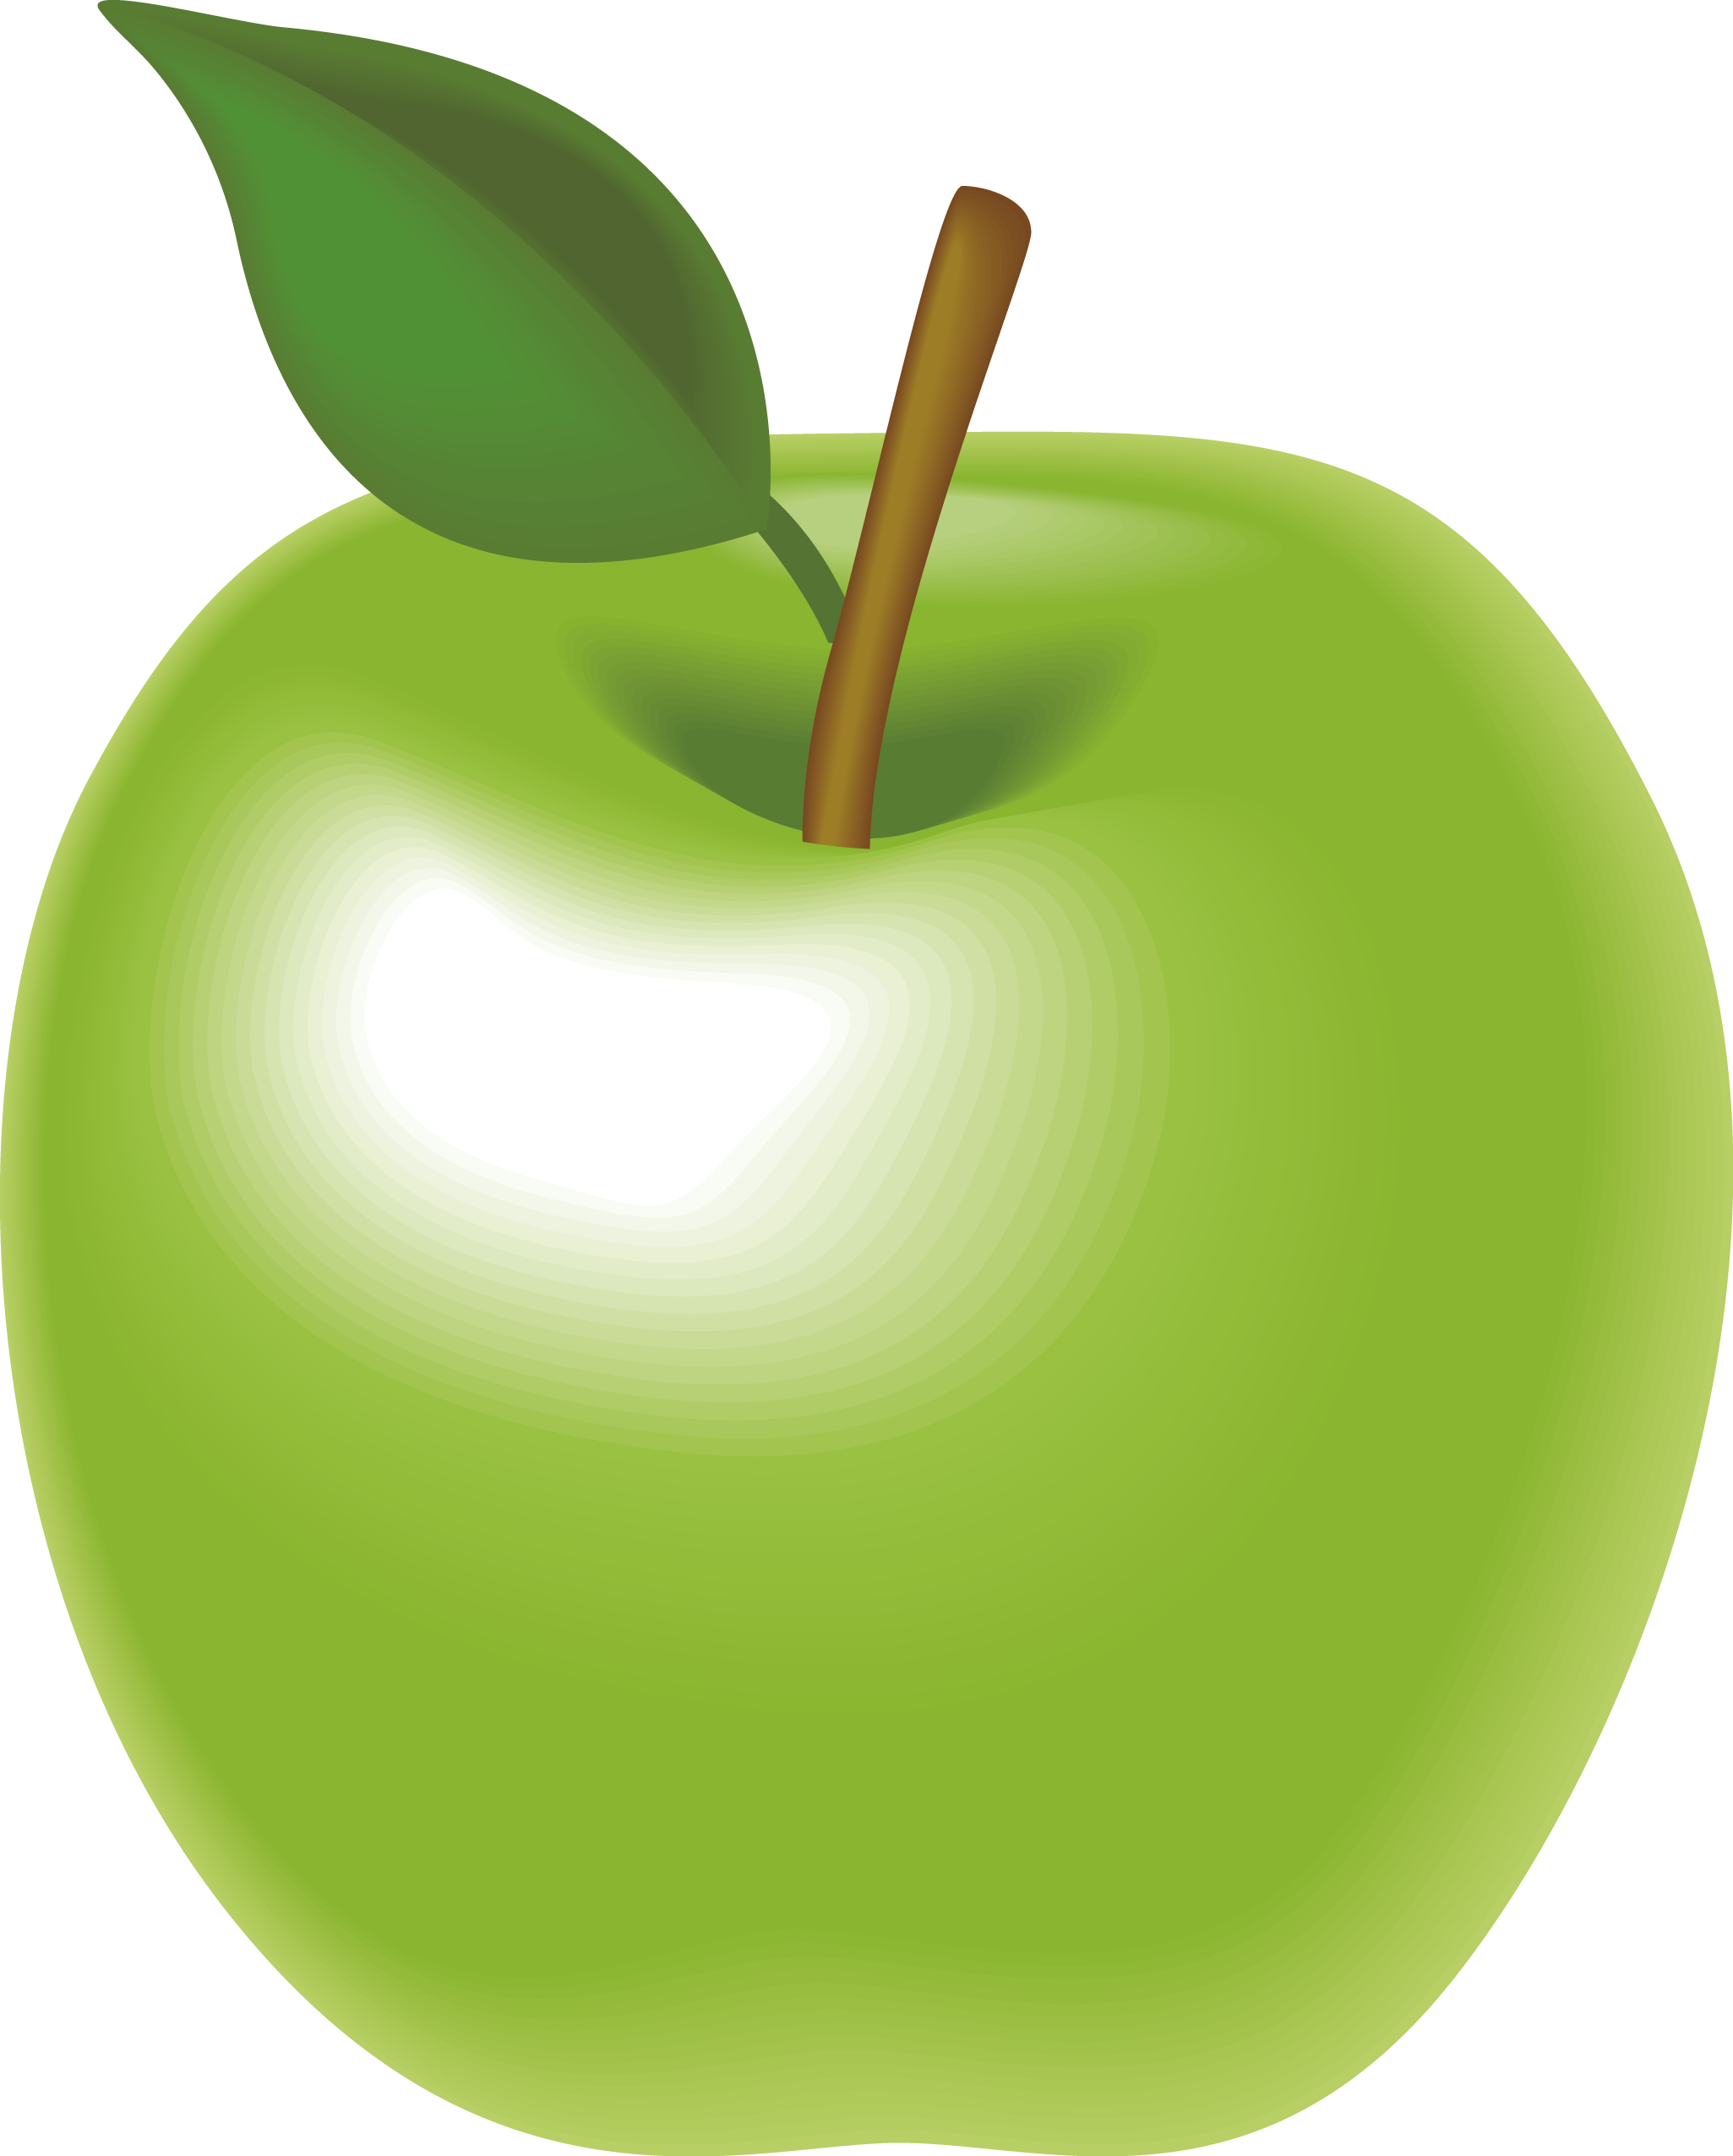 Granny Smith Apple Animation - Green Vector Apple Png (2051x2551)